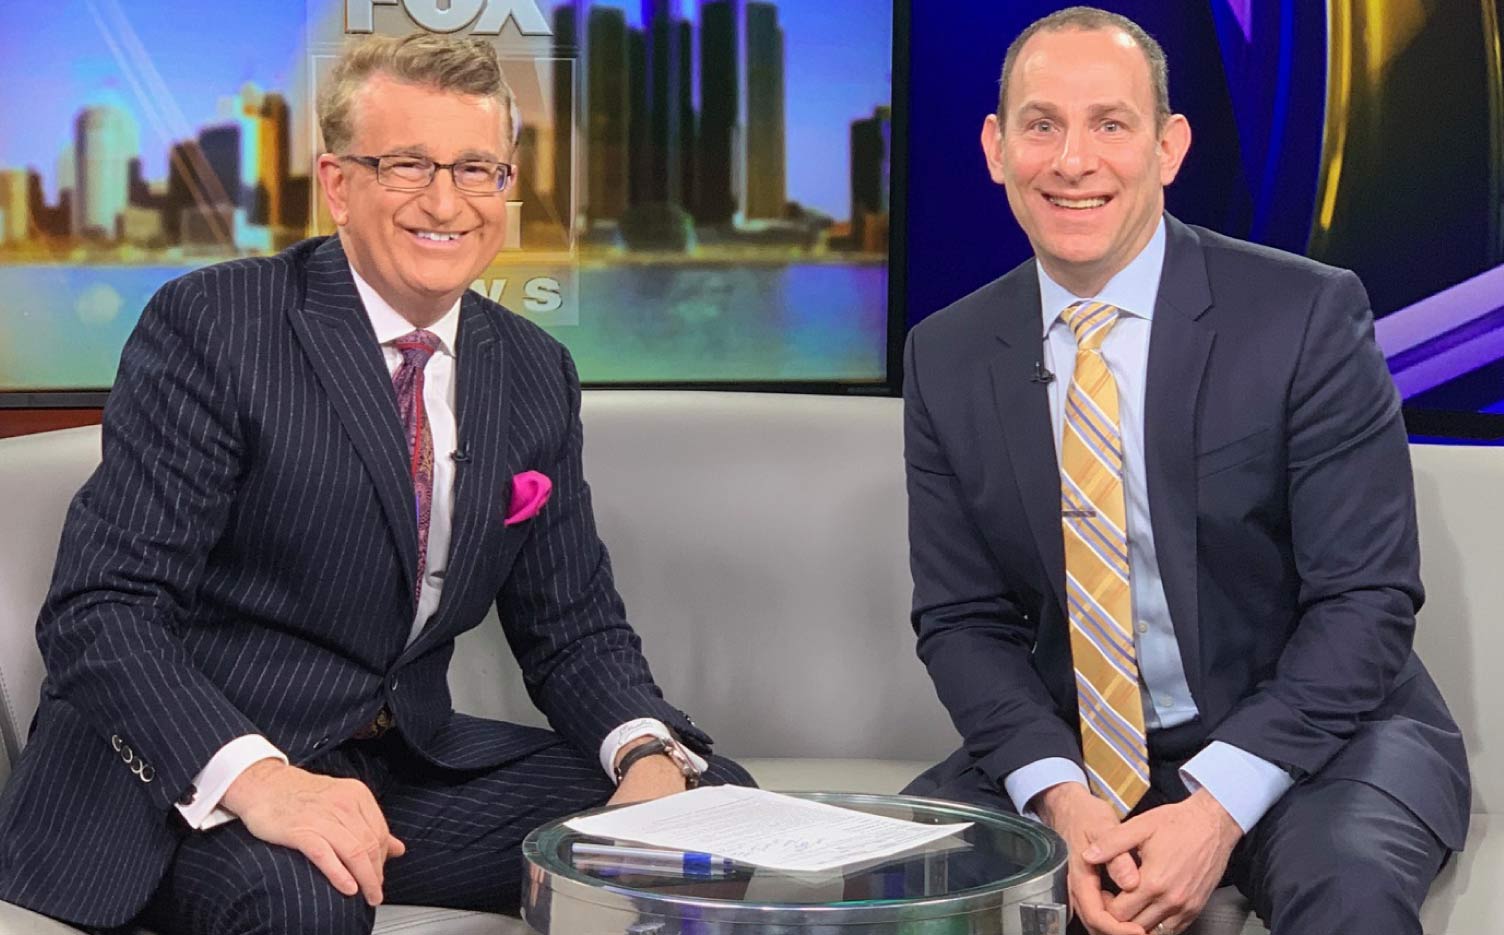 Jon Talks with Fox 2 News Anchor Charlie Langton: How to Get a Job After College